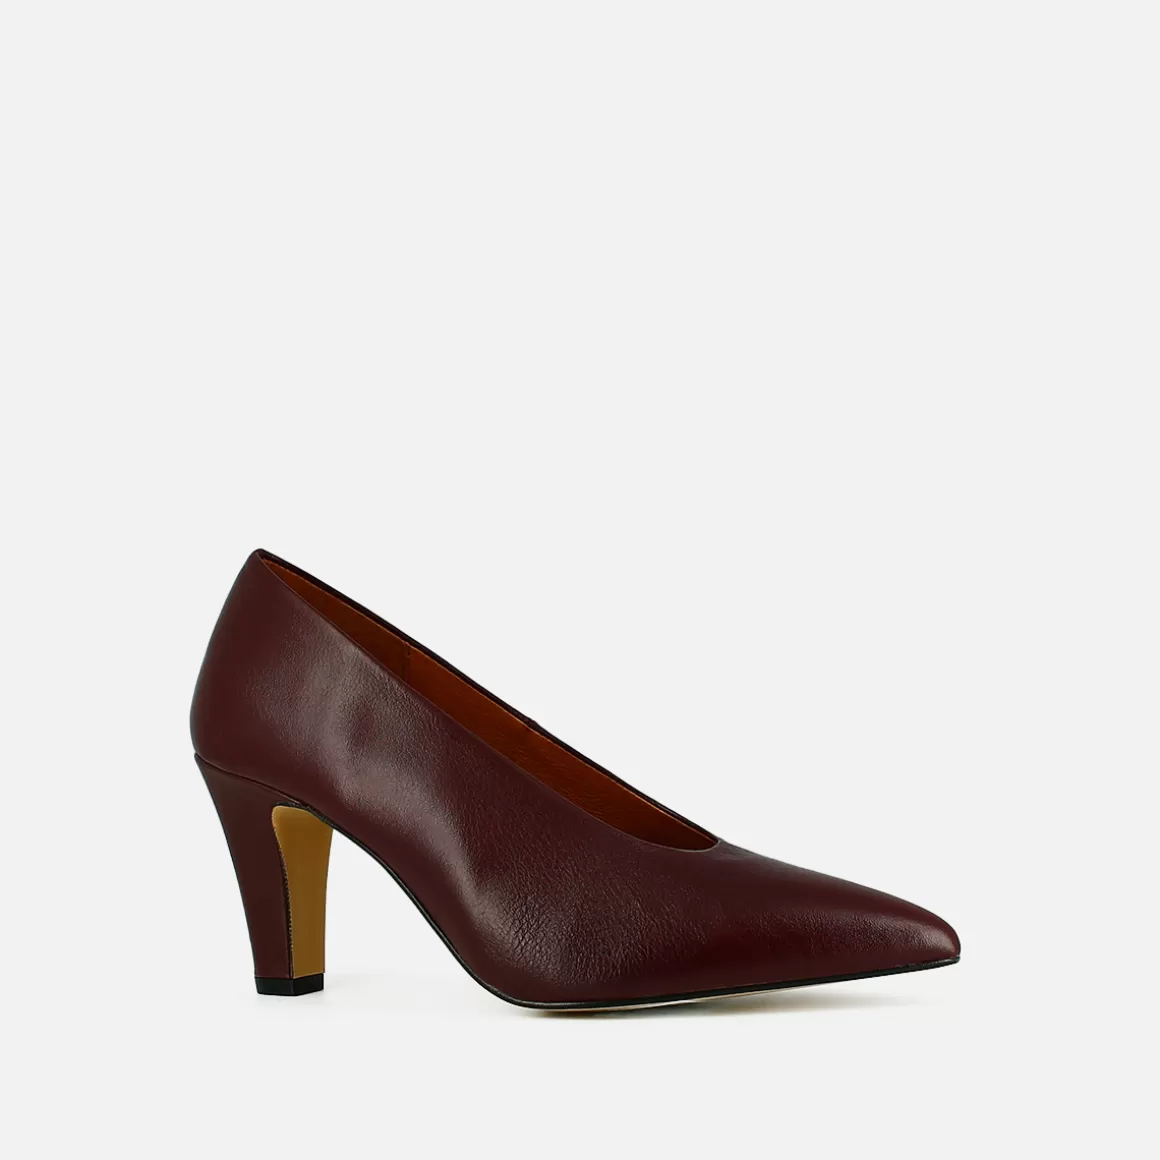 Pumps with pointed-toe pumps<Jonak Best Sale